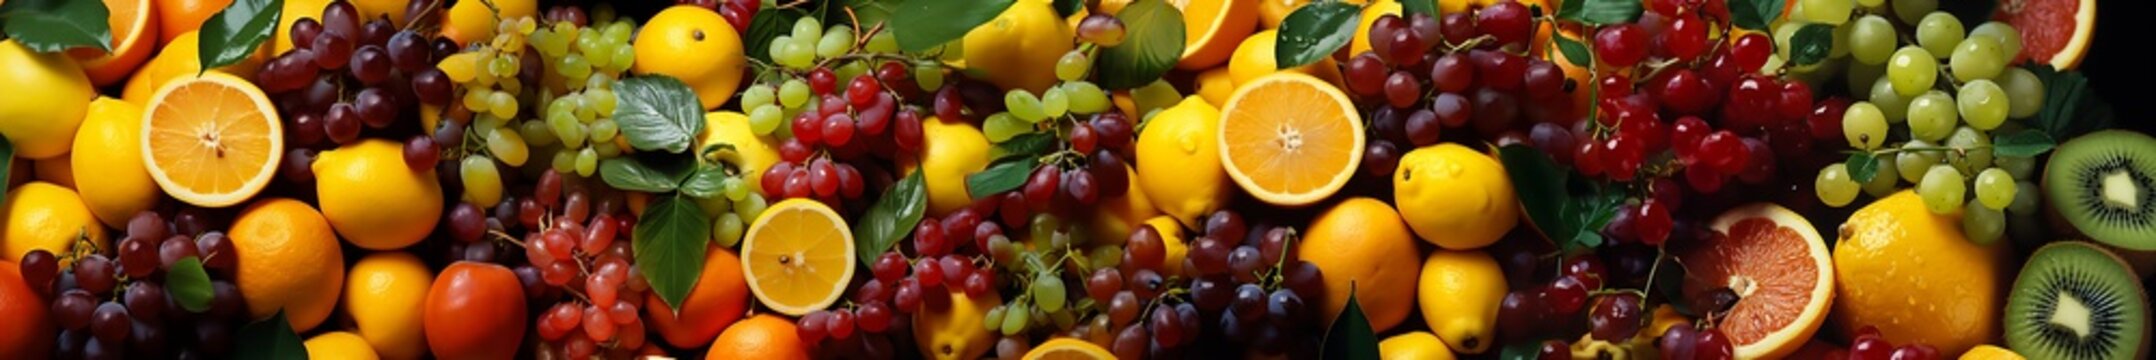 Horizontal image of many fruits, berries and citrus fruits as a background